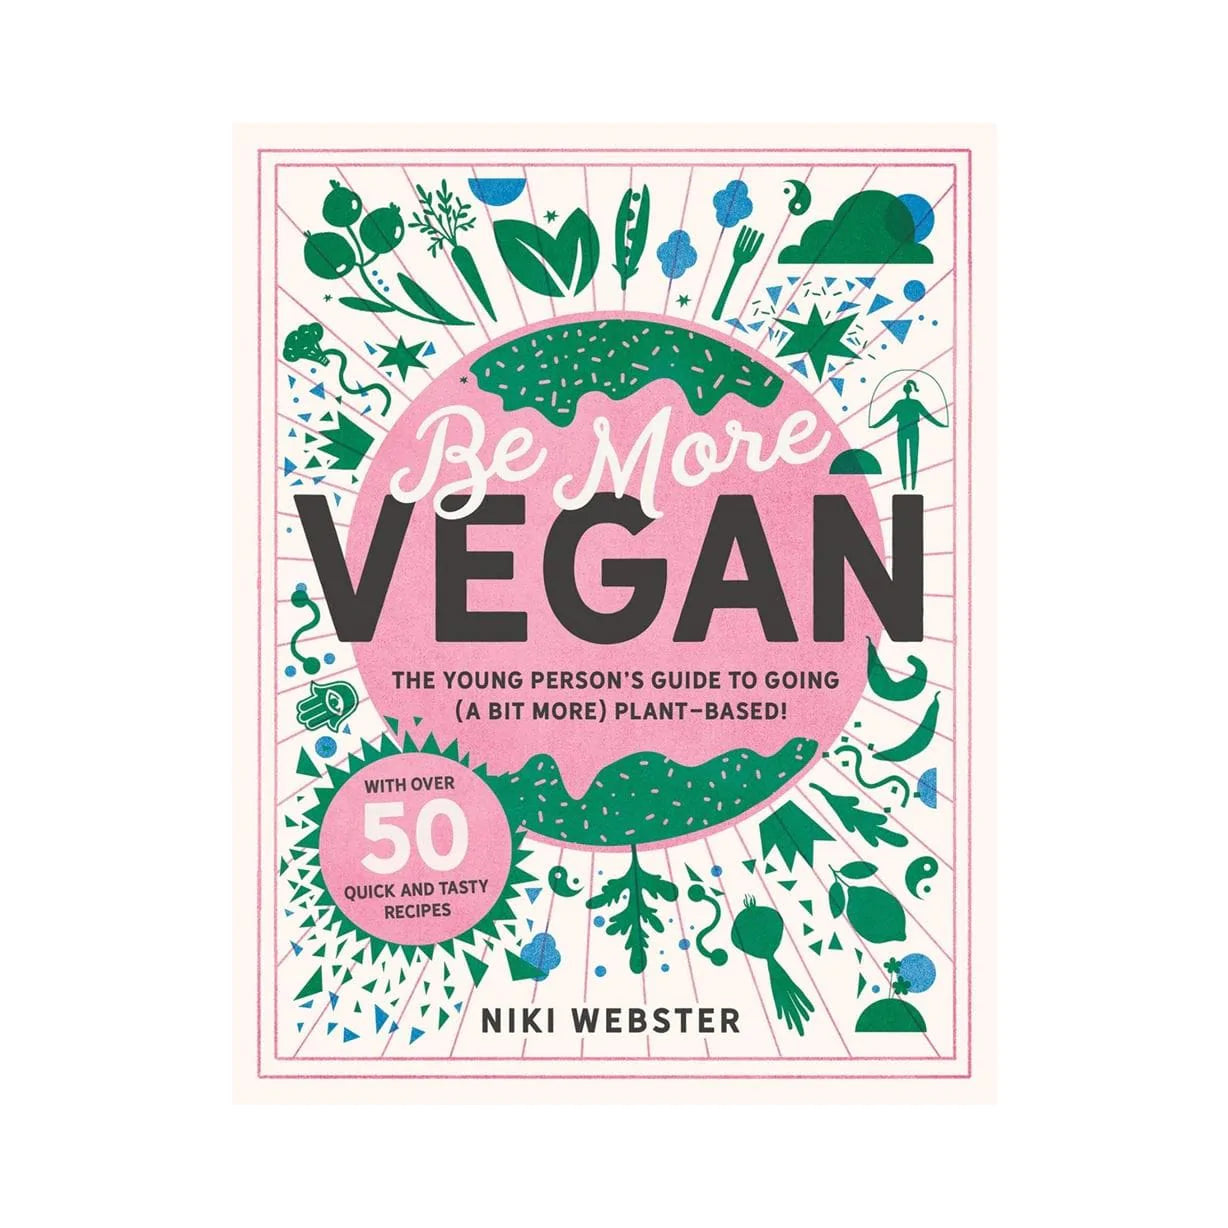 Our Bookshelf Print Books Be More Vegan: The young person's guide to a plant-based lifestyle - Hardcover